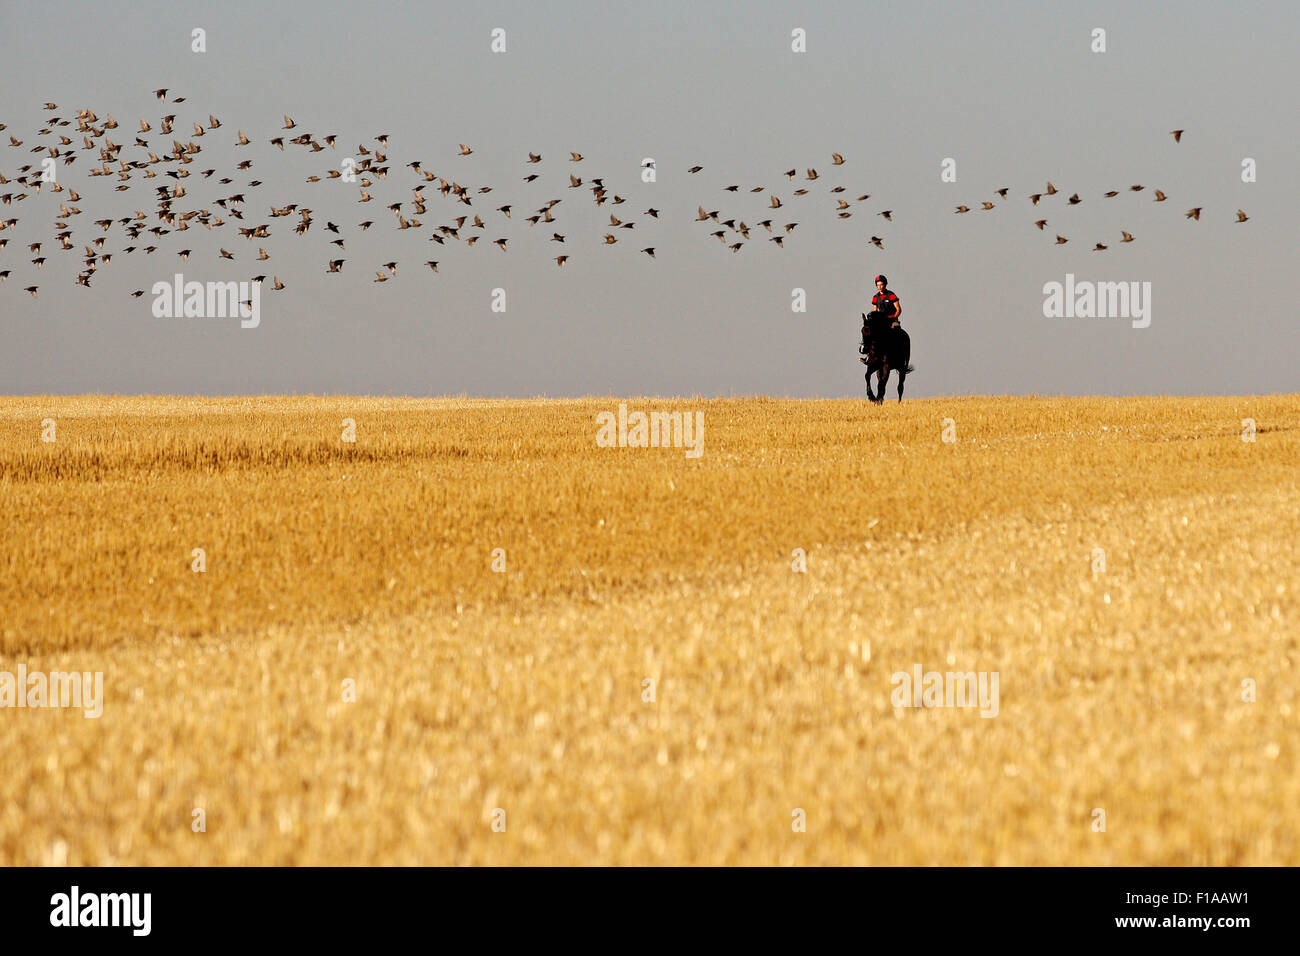 Ingelheim, Germany, boy rides on his horse galloping over a mown field Stock Photo